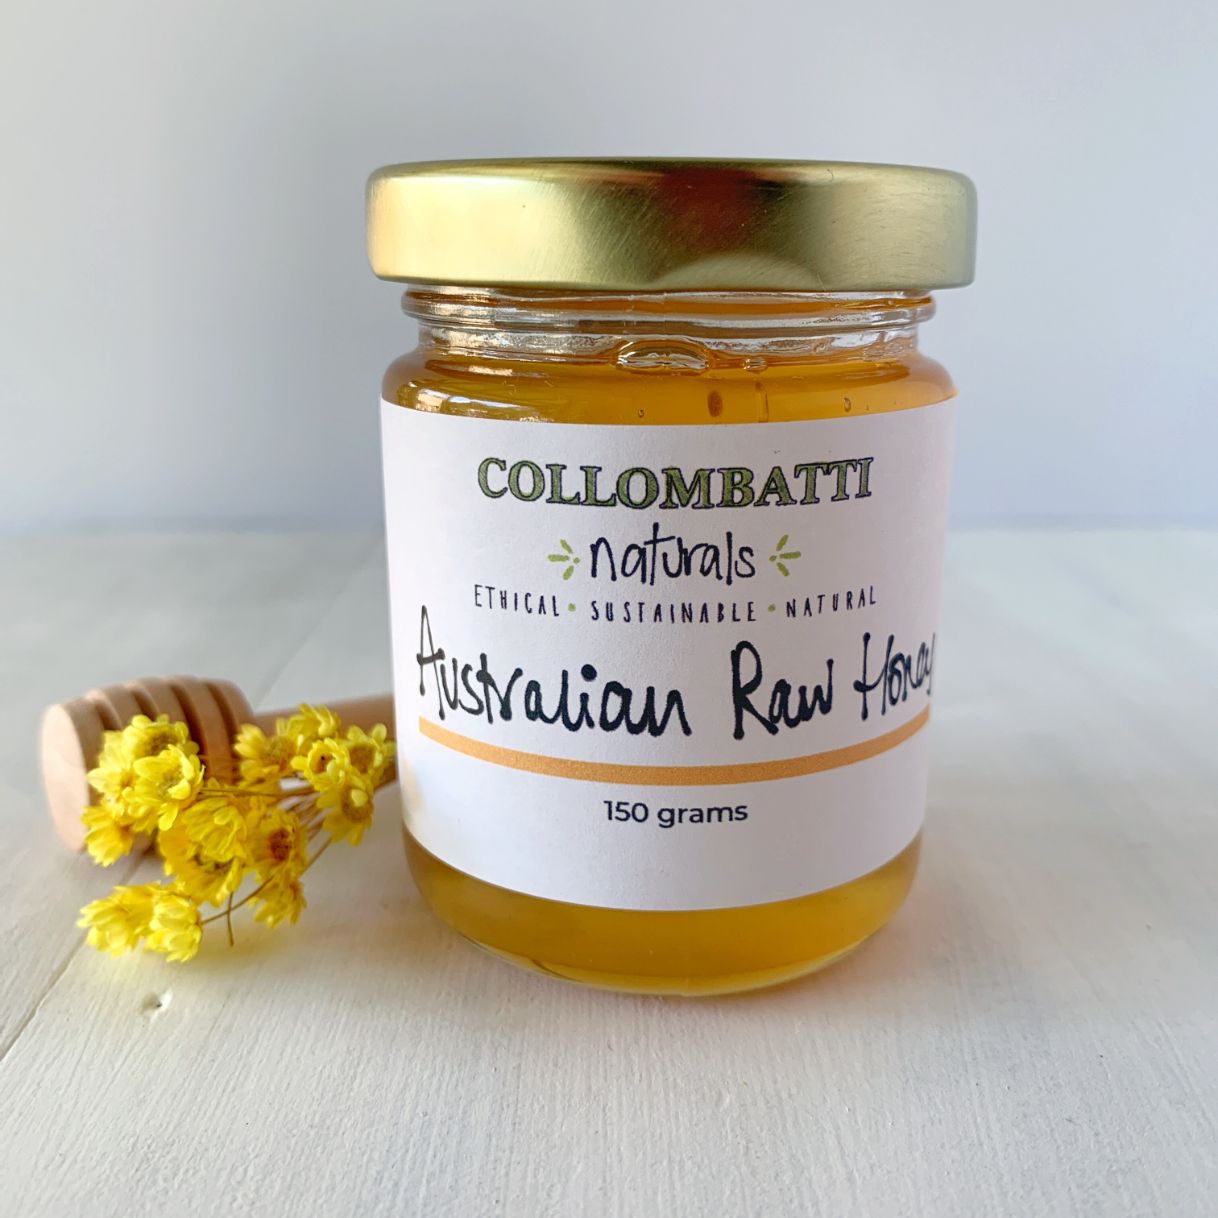 Collombatti Naturals 150g of raw honey packed in glass jars